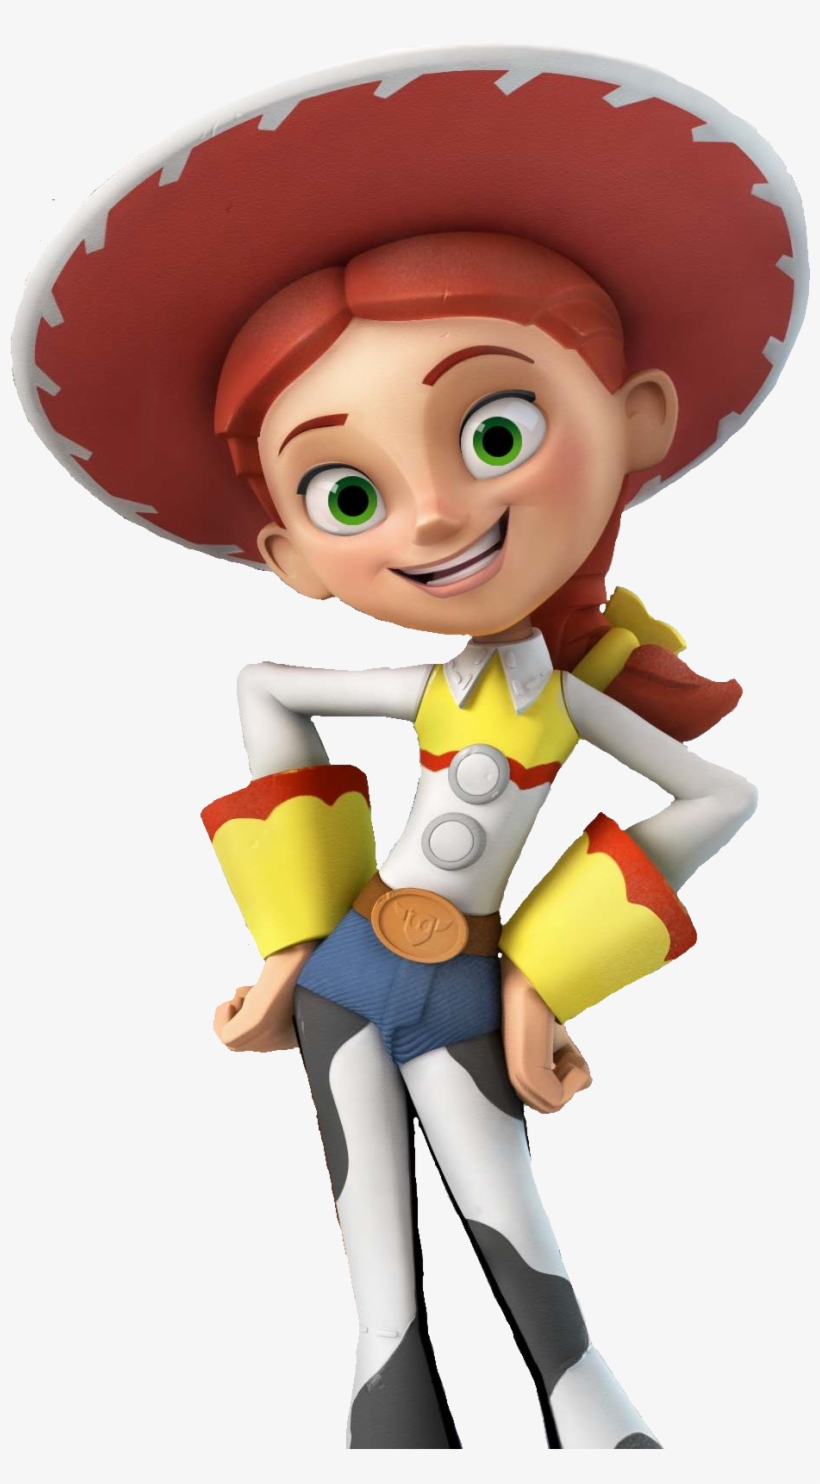 Frontpagejessie - Disney Infinity, transparent png #1308036